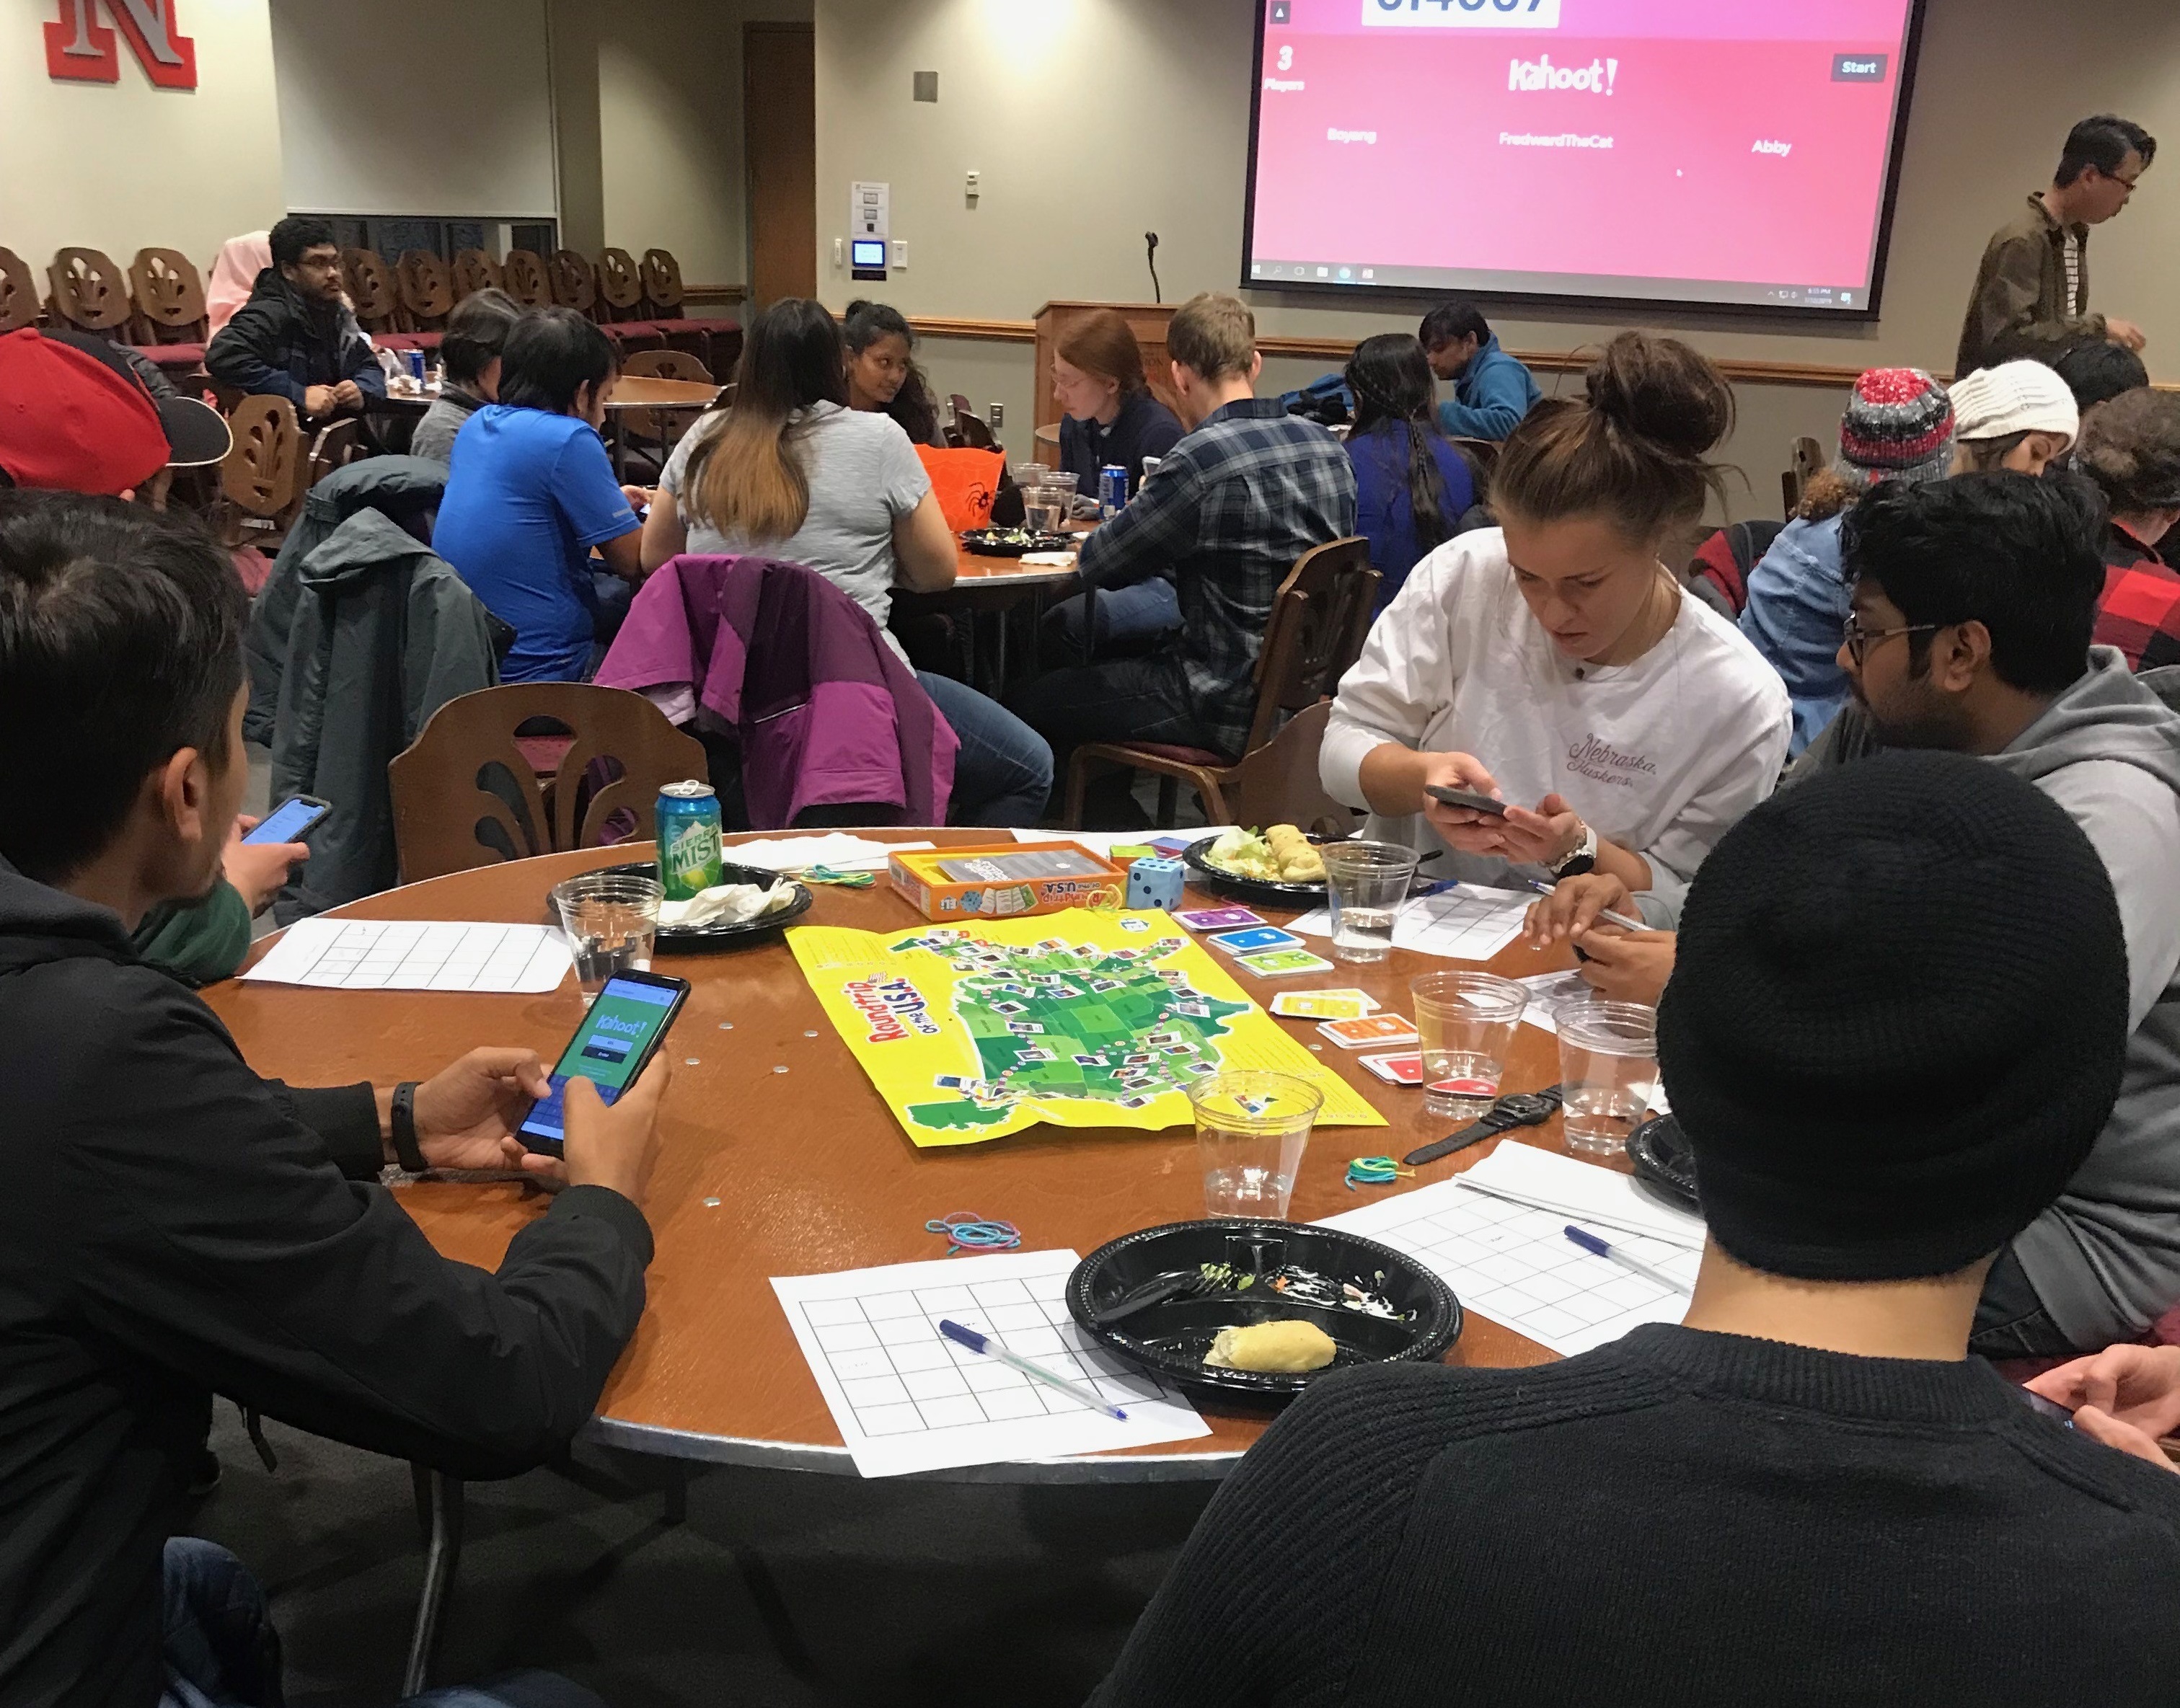 Students at the spring 2019 international graduate student welcome party play the trivia game Kahoot! to answer questions about Nebraska and countries around the world.